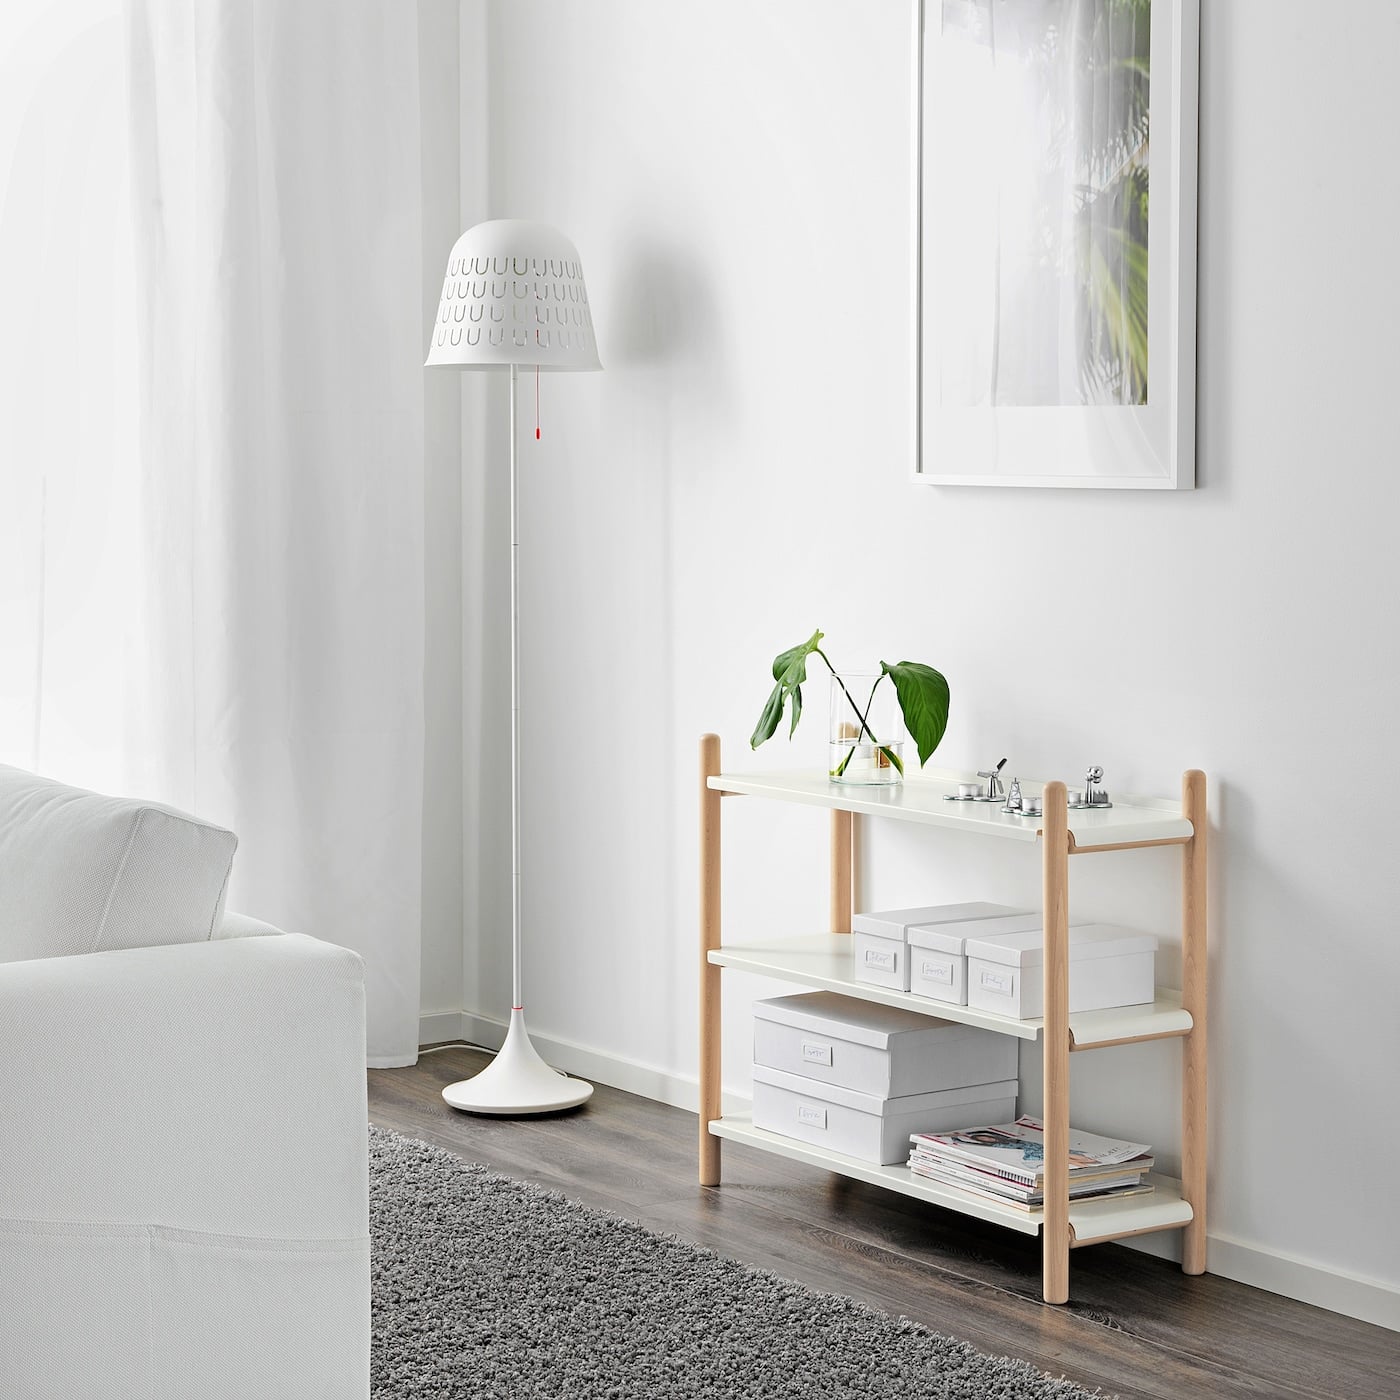 Ikea Ps 17 Shelf Unit Transform Your Small Space Into A Roomy Oasis With These Smart Furniture Solutions From Ikea Popsugar Home Photo 2